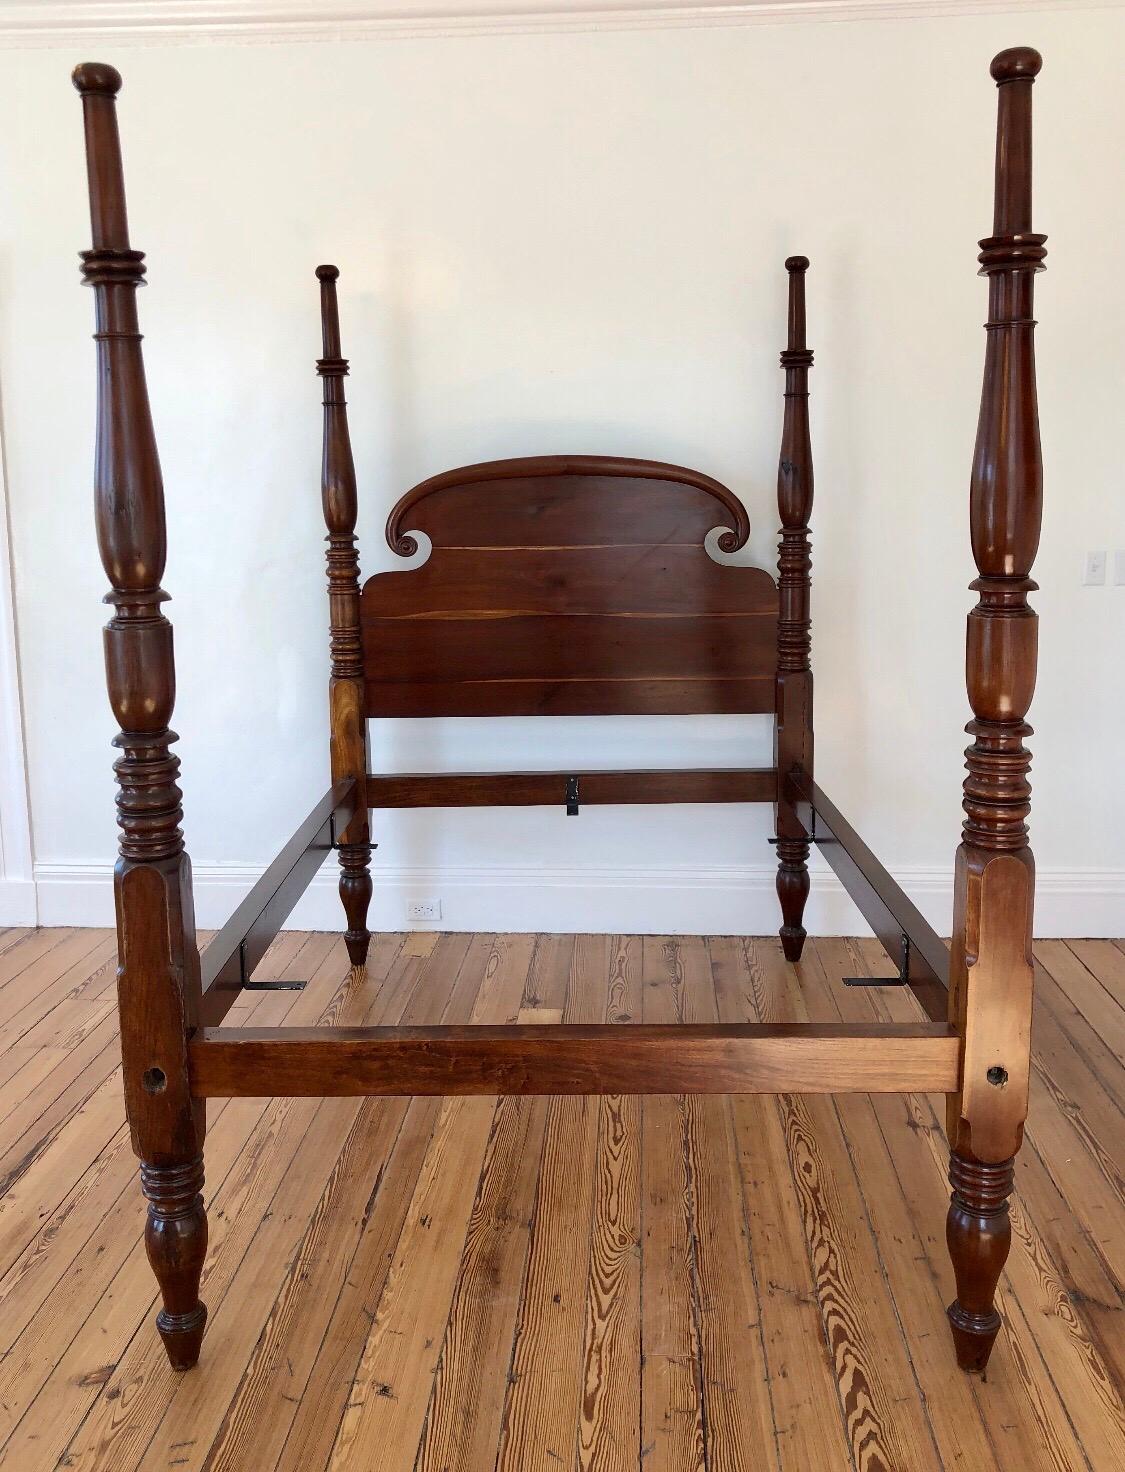 This elegant West Indies poster bed was made in the Caribbean Island of Saint Croix. The Headboard is solid mahogany and carved in the Rams Horn style. The four post are solid mahogany and hand turned. The simplicity of the turnings and classic Rams